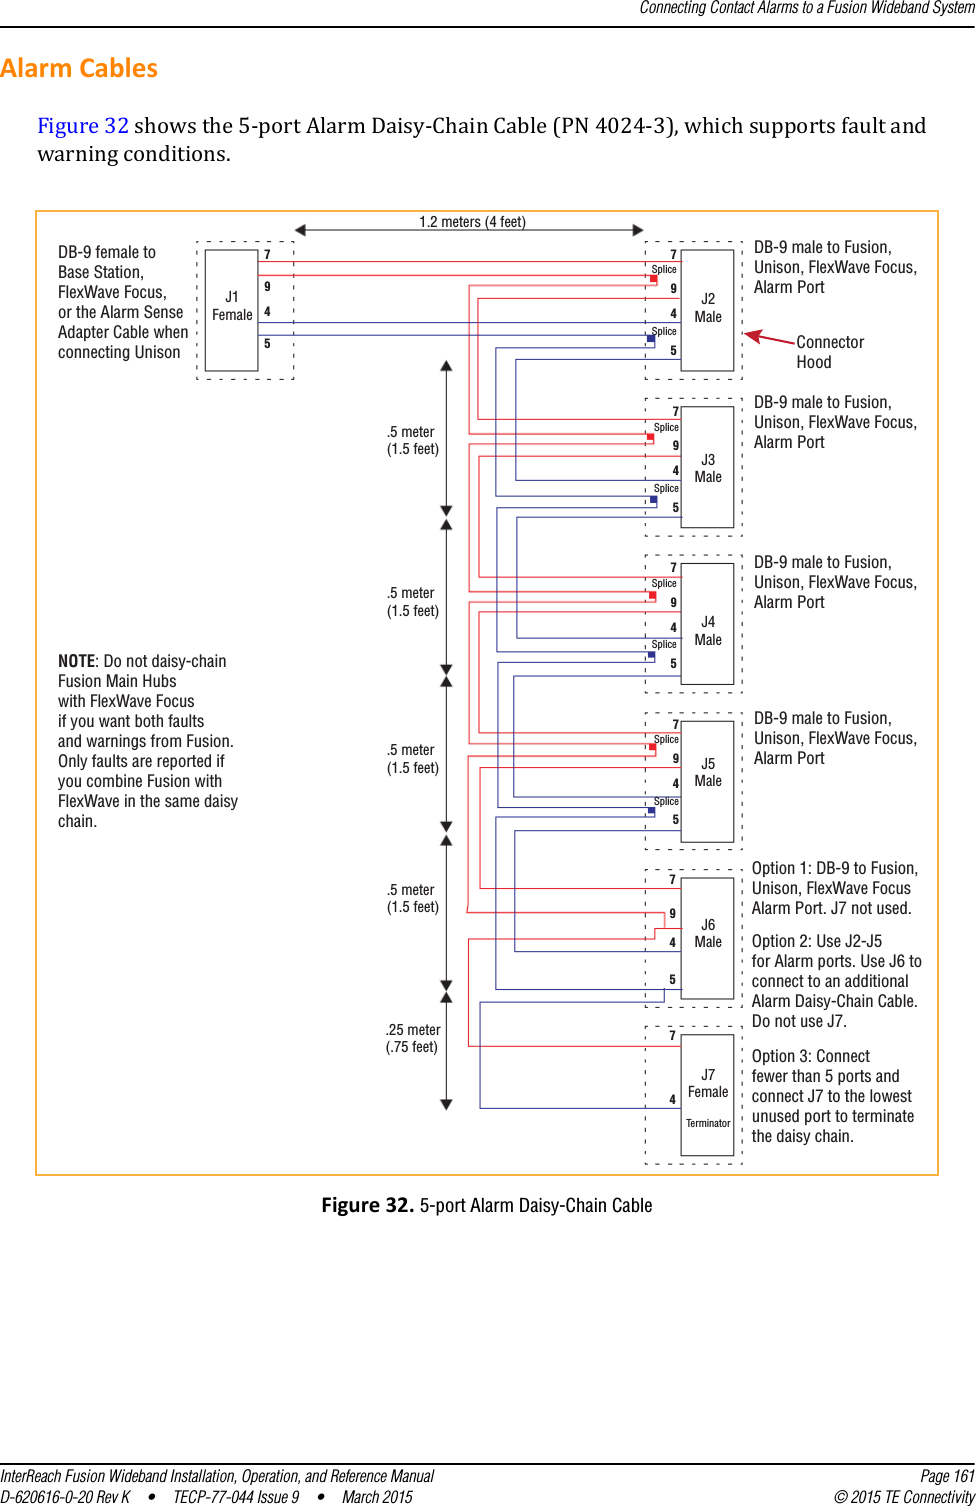 Connecting Contact Alarms to a Fusion Wideband SystemInterReach Fusion Wideband Installation, Operation, and Reference Manual Page 161D-620616-0-20 Rev K  •  TECP-77-044 Issue 9  •  March 2015 © 2015 TE ConnectivityAlarm CablesFigure 32 shows the 5-port Alarm Daisy-Chain Cable (PN 4024-3), which supports fault and warning conditions.Figure 32. 5-port Alarm Daisy-Chain Cable1.2 meters (4 feet)J1FemaleJ2MaleJ3MaleJ4MaleJ5MaleJ6MaleJ7FemaleTerminatorNOTE: Do not daisy-chainFusion Main Hubswith FlexWave Focusif you want both faultsand warnings from Fusion.Only faults are reported ifyou combine Fusion withFlexWave in the same daisychain.7945DB-9 female toBase Station,FlexWave Focus,or the Alarm SenseAdapter Cable whenconnecting Unison7945SpliceSpliceDB-9 male to Fusion,Unison, FlexWave Focus,Alarm PortConnectorHoodDB-9 male to Fusion,Unison, FlexWave Focus,Alarm PortDB-9 male to Fusion,Unison, FlexWave Focus,Alarm PortDB-9 male to Fusion,Unison, FlexWave Focus,Alarm Port7945SpliceSplice7945SpliceSplice7945SpliceSplice794574Option 1: DB-9 to Fusion,Unison, FlexWave FocusAlarm Port. J7 not used.Option 2: Use J2-J5for Alarm ports. Use J6 toconnect to an additionalAlarm Daisy-Chain Cable.Do not use J7.Option 3: Connectfewer than 5 ports andconnect J7 to the lowestunused port to terminatethe daisy chain..5 meter(1.5 feet).5 meter(1.5 feet).5 meter(1.5 feet).5 meter(1.5 feet).25 meter(.75 feet)